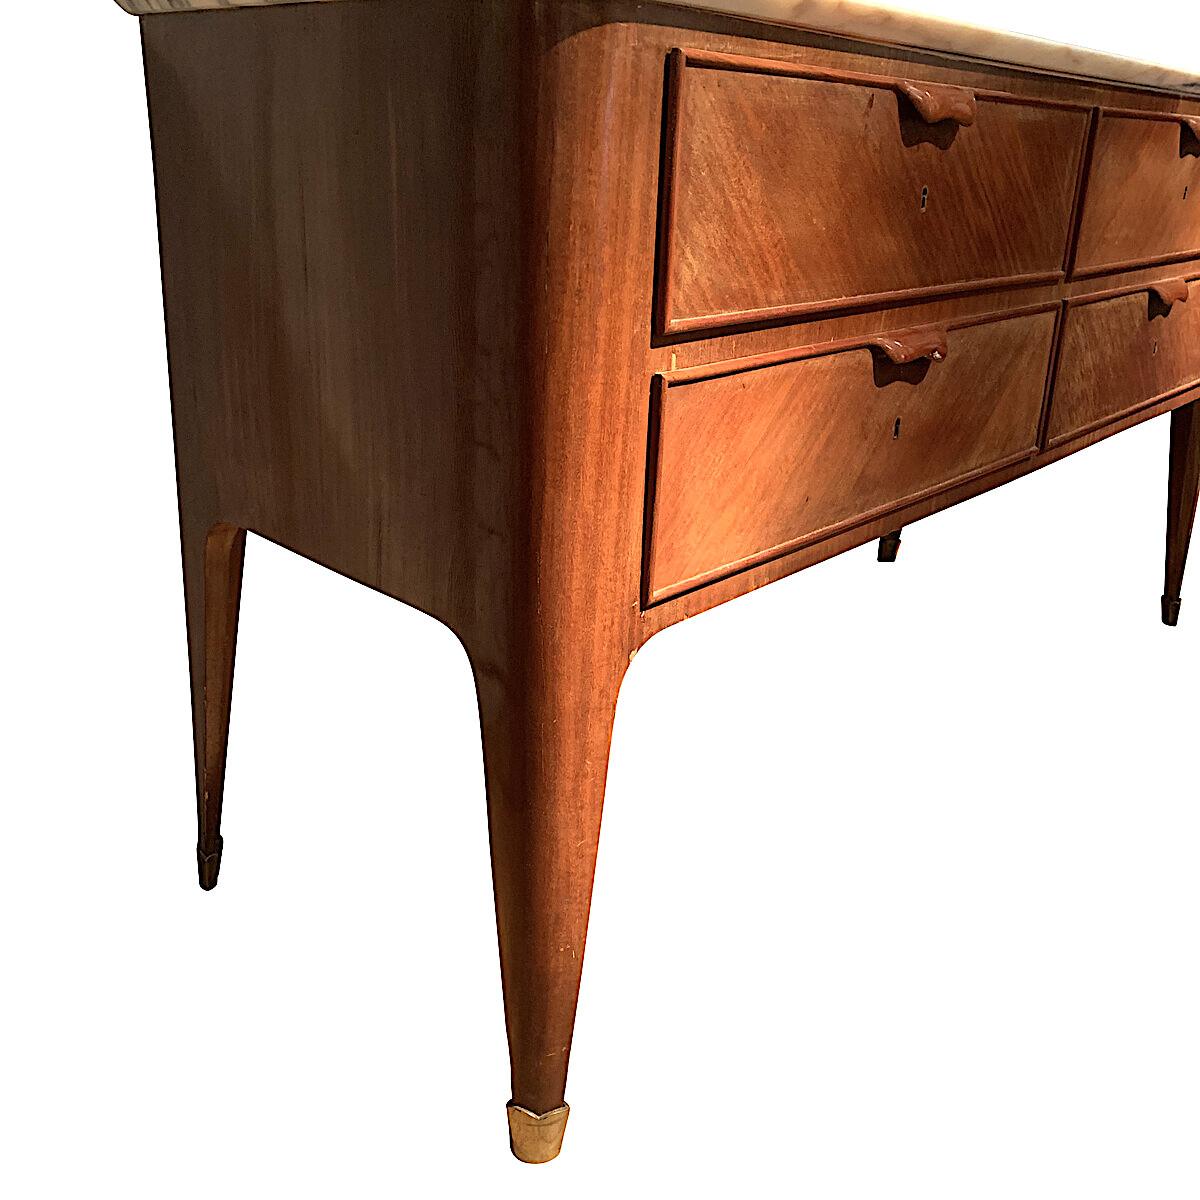 Mid-20th Century Italian Paolo Buffa  Palisander Wood, Marble-Top, Four Drawer Credenza, 1940s